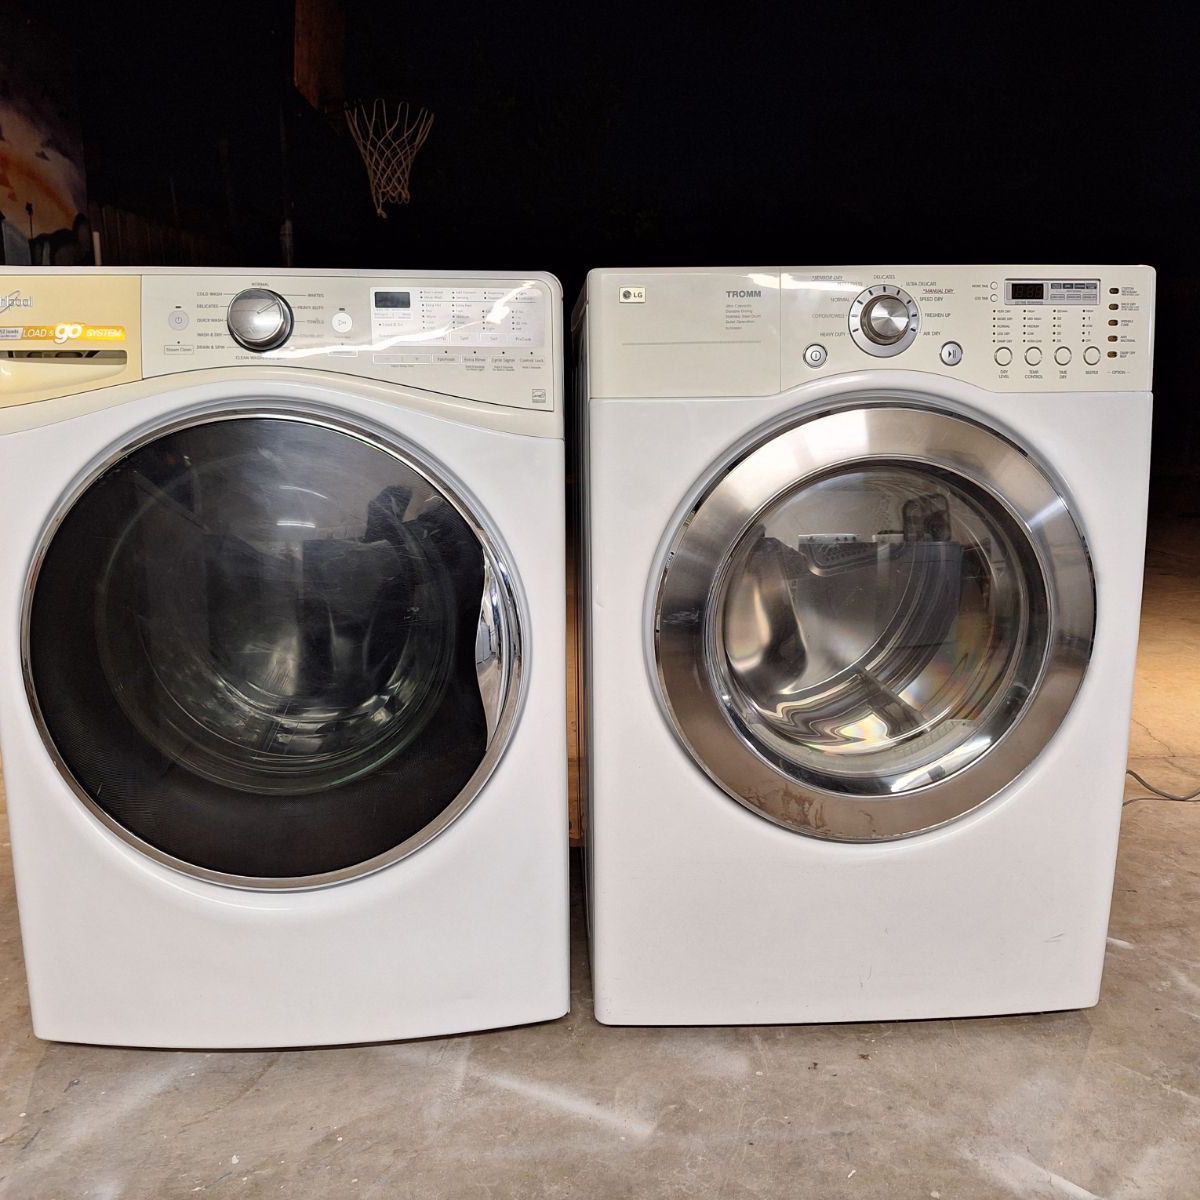 WHIRLPOOL WASHER AND LG GAS DRYER $480 DELIVERED AND INSTALLED 90 DAY WARRANTY 